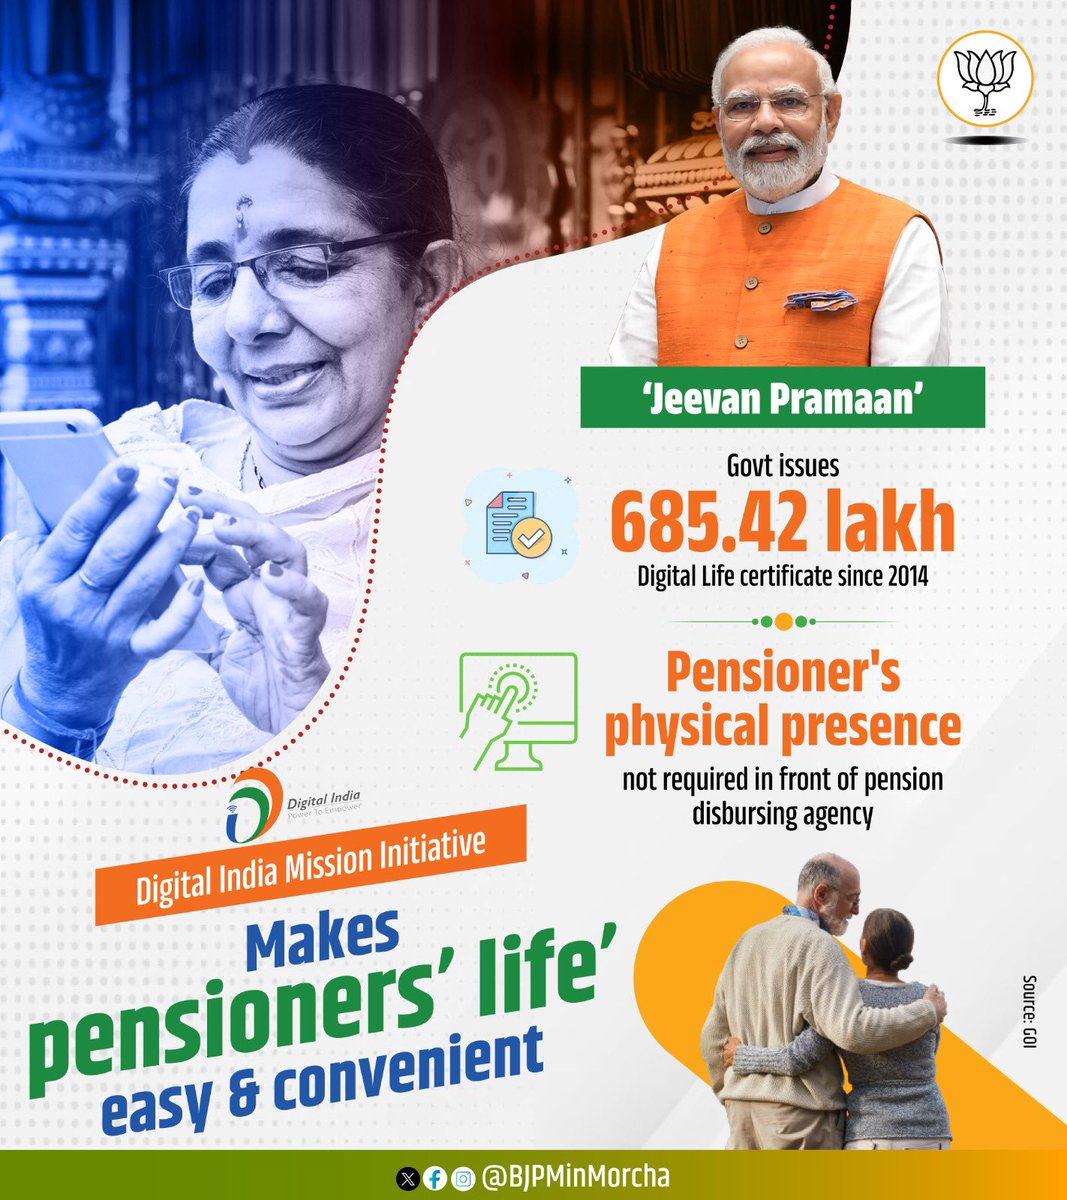 Modi govt makes pensioners’ life’ easy & convenient with #JeevanPramaan. Govt issues 685.42 lakh Digital Life certificate since 2014; now, pensioner's physical presence not required in front of pension disbursing agency.

#DigitalIndia